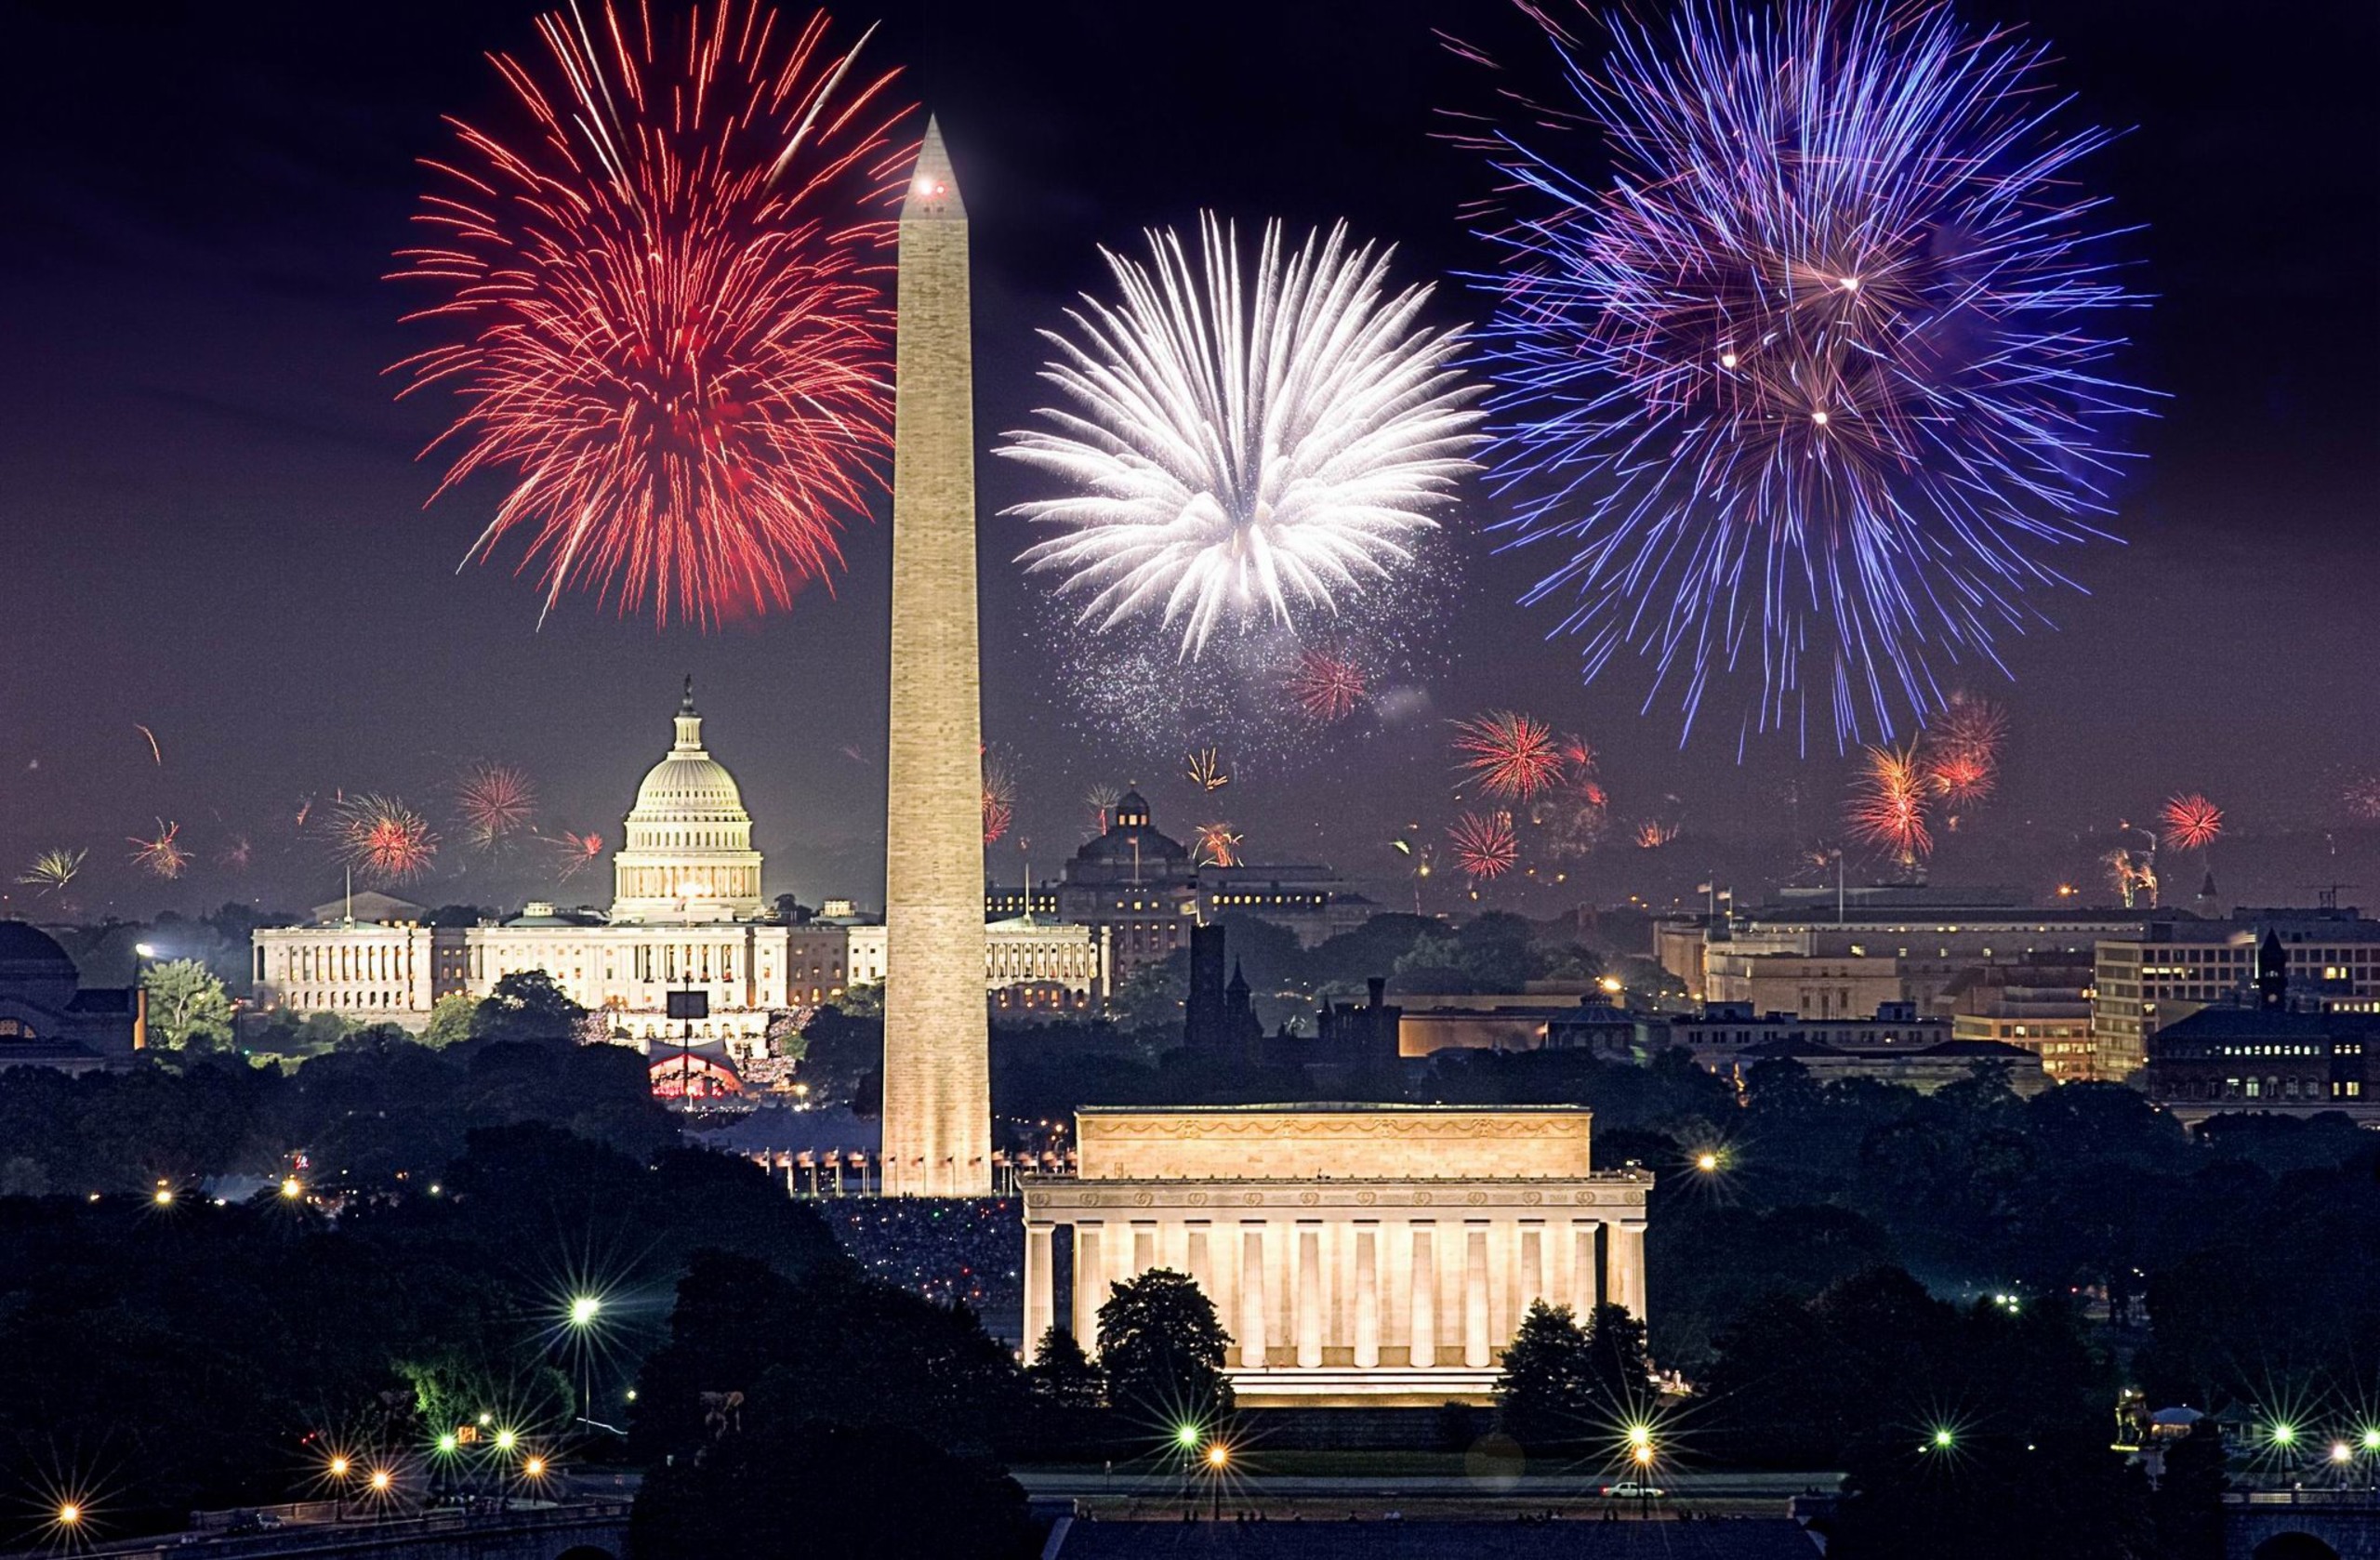 Red, white, and blue fireworks going off above DC